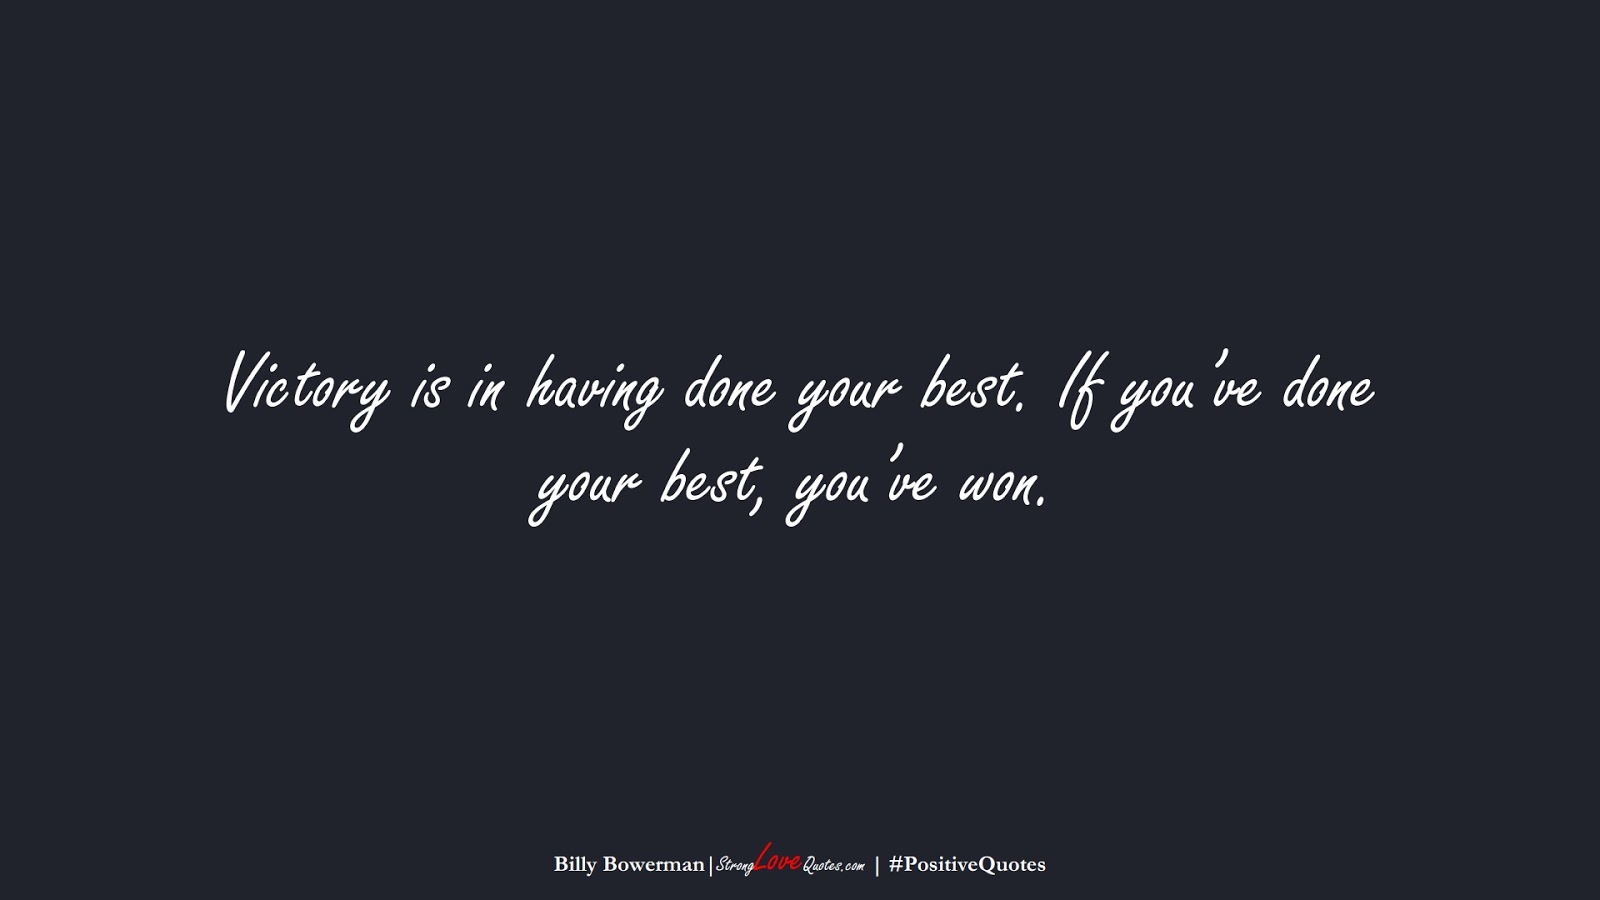 Victory is in having done your best. If you’ve done your best, you’ve won. (Billy Bowerman);  #PositiveQuotes